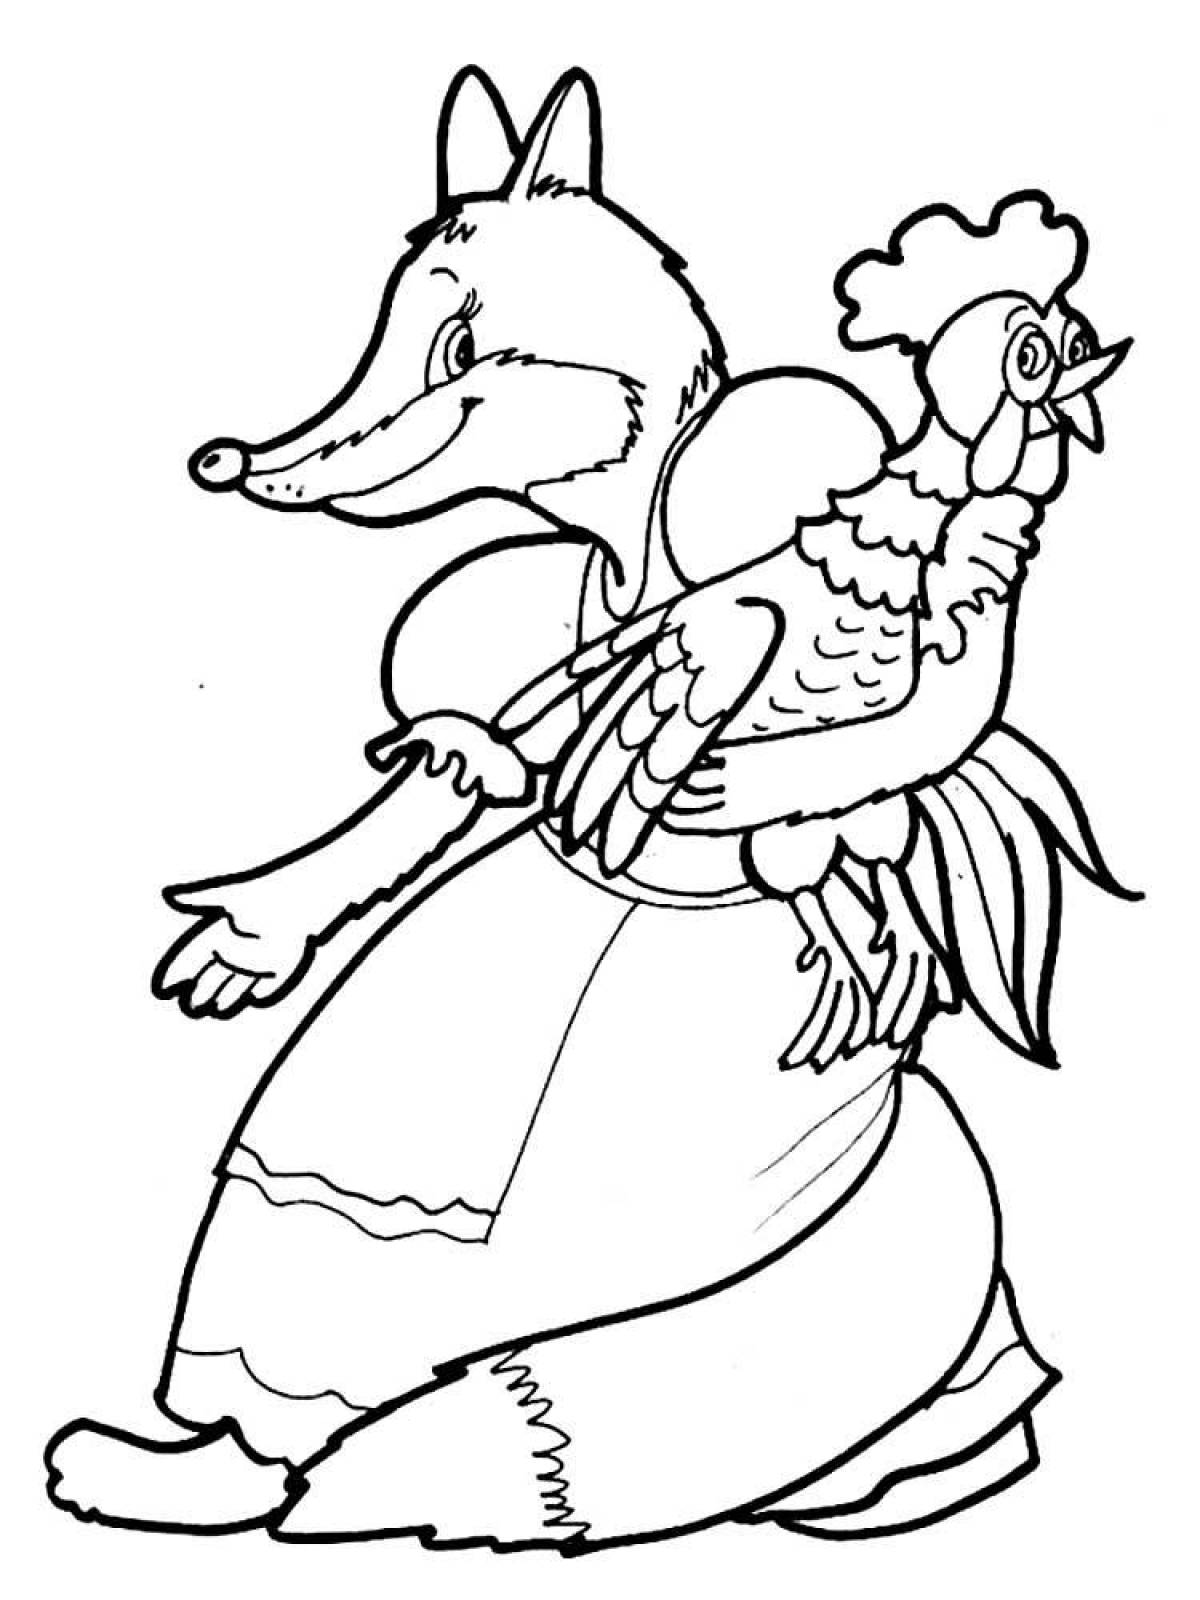 Coloring page dazzling Russian folk tales